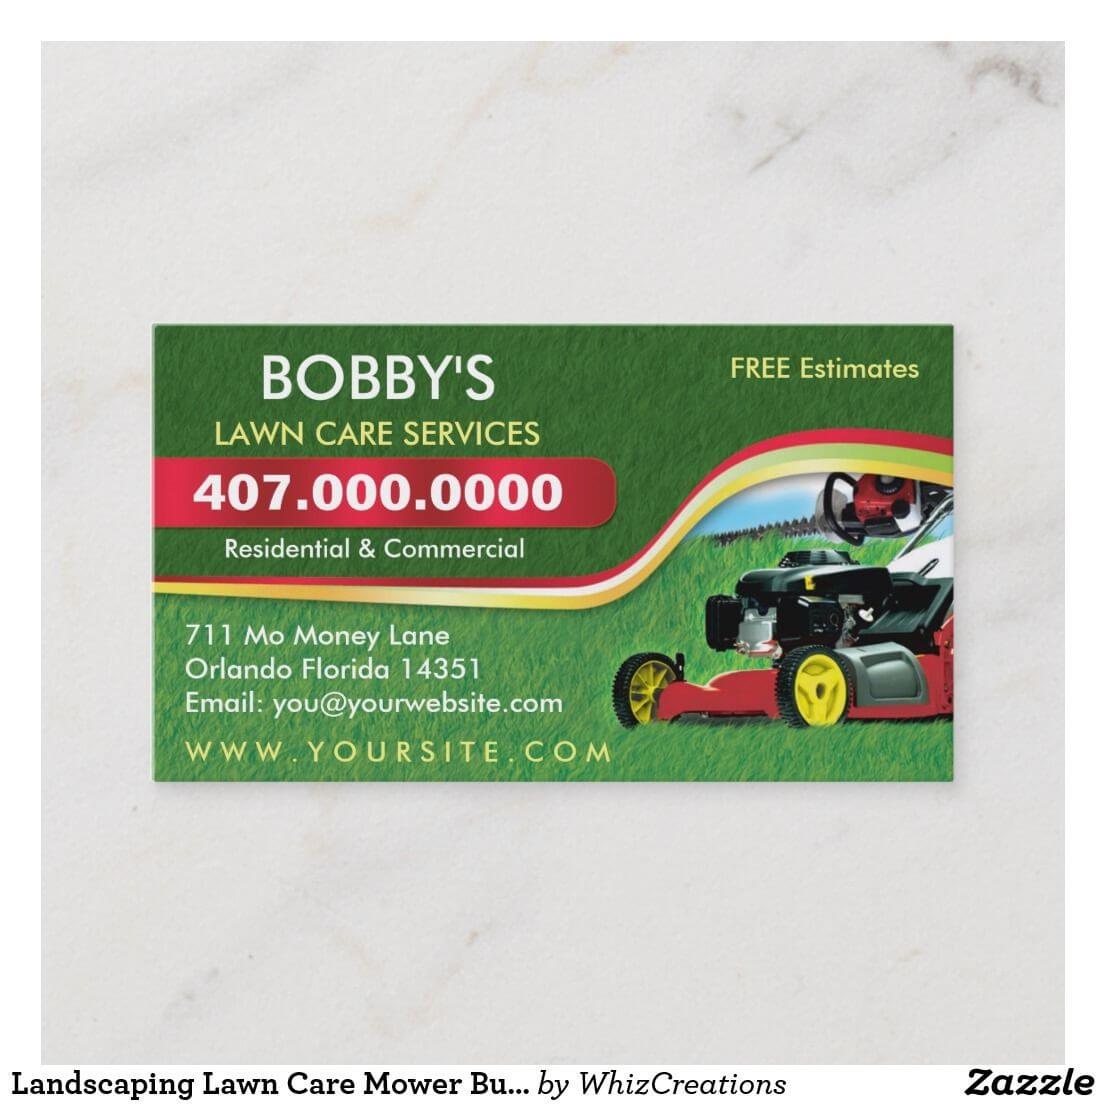 Landscaping Lawn Care Mower Business Card Template | Zazzle Intended For Lawn Care Business Cards Templates Free